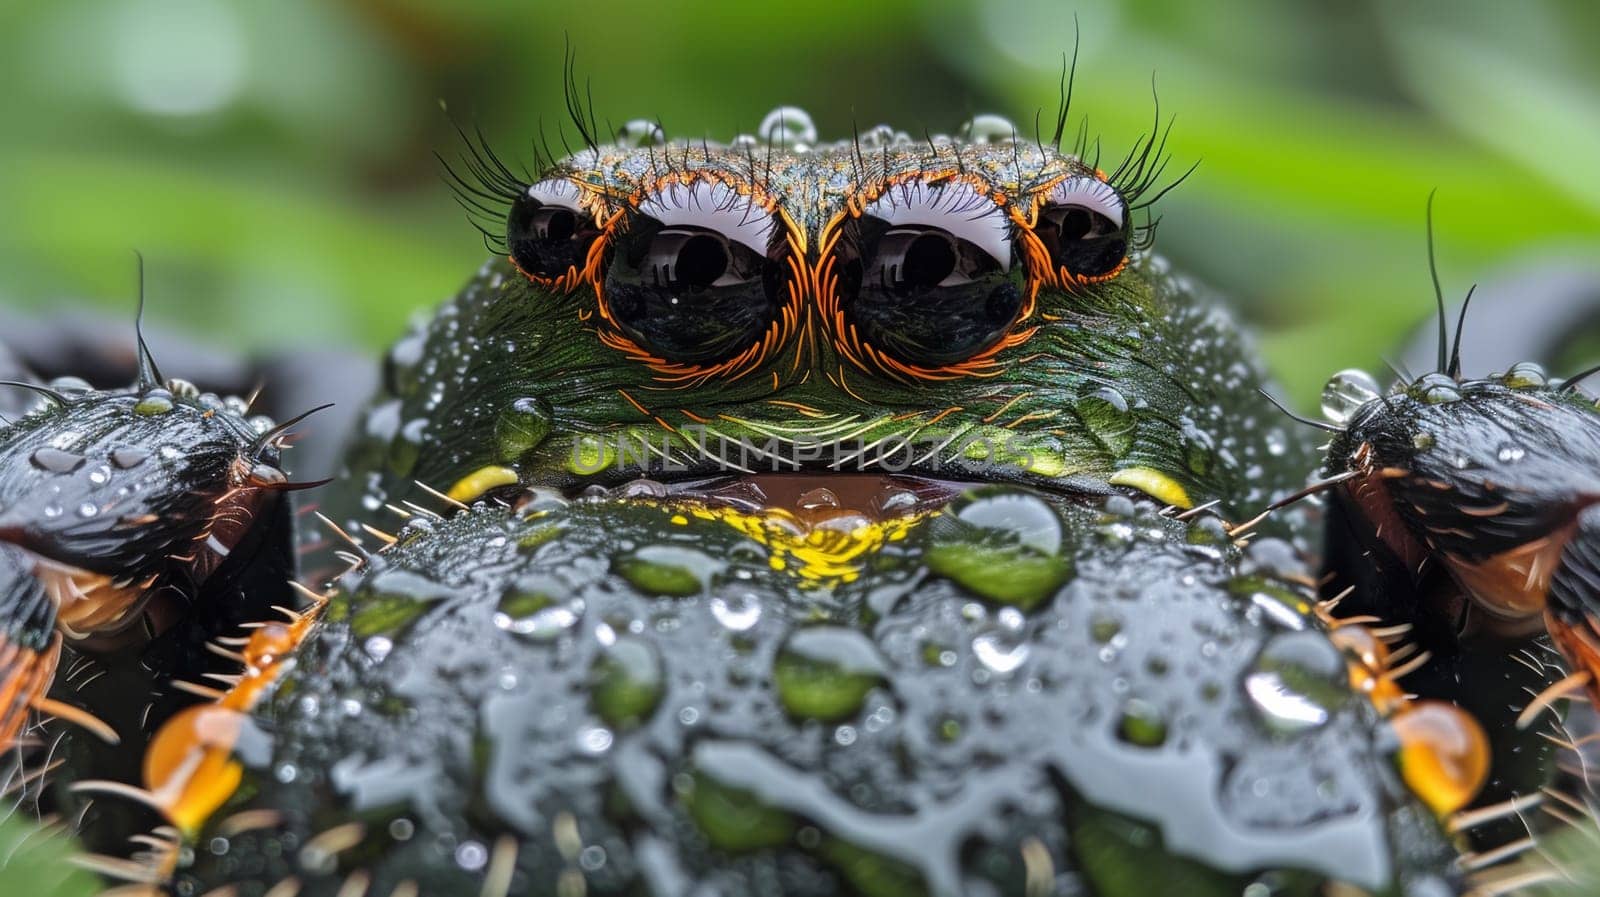 A close up of a spider with water droplets on its face